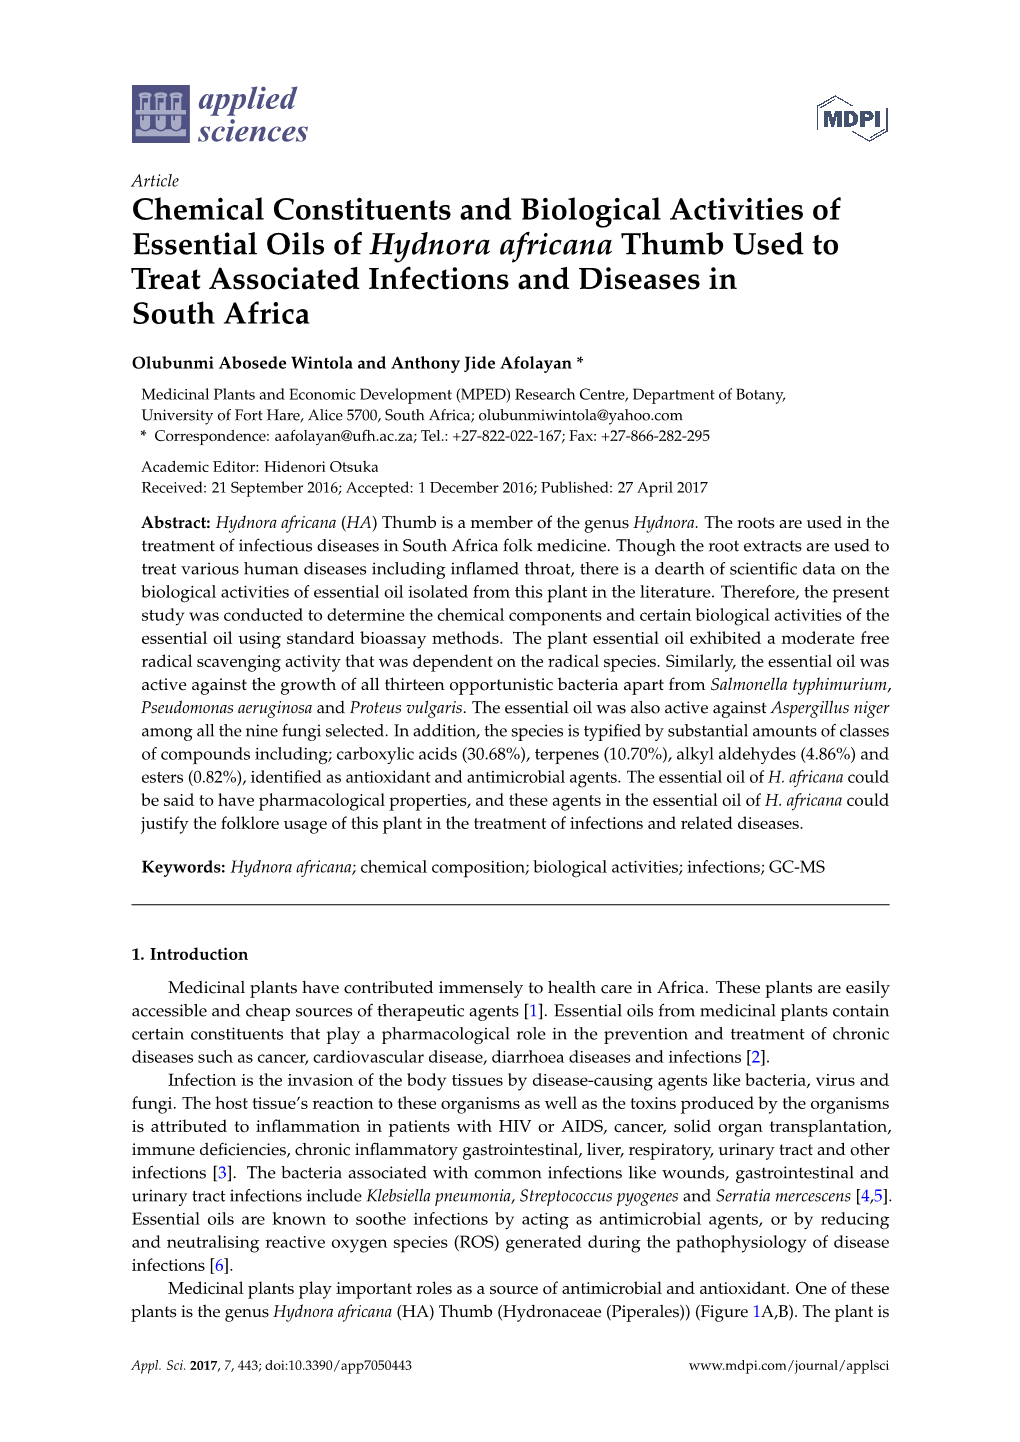 Chemical Constituents and Biological Activities of Essential Oils of Hydnora Africana Thumb Used to Treat Associated Infections and Diseases in South Africa